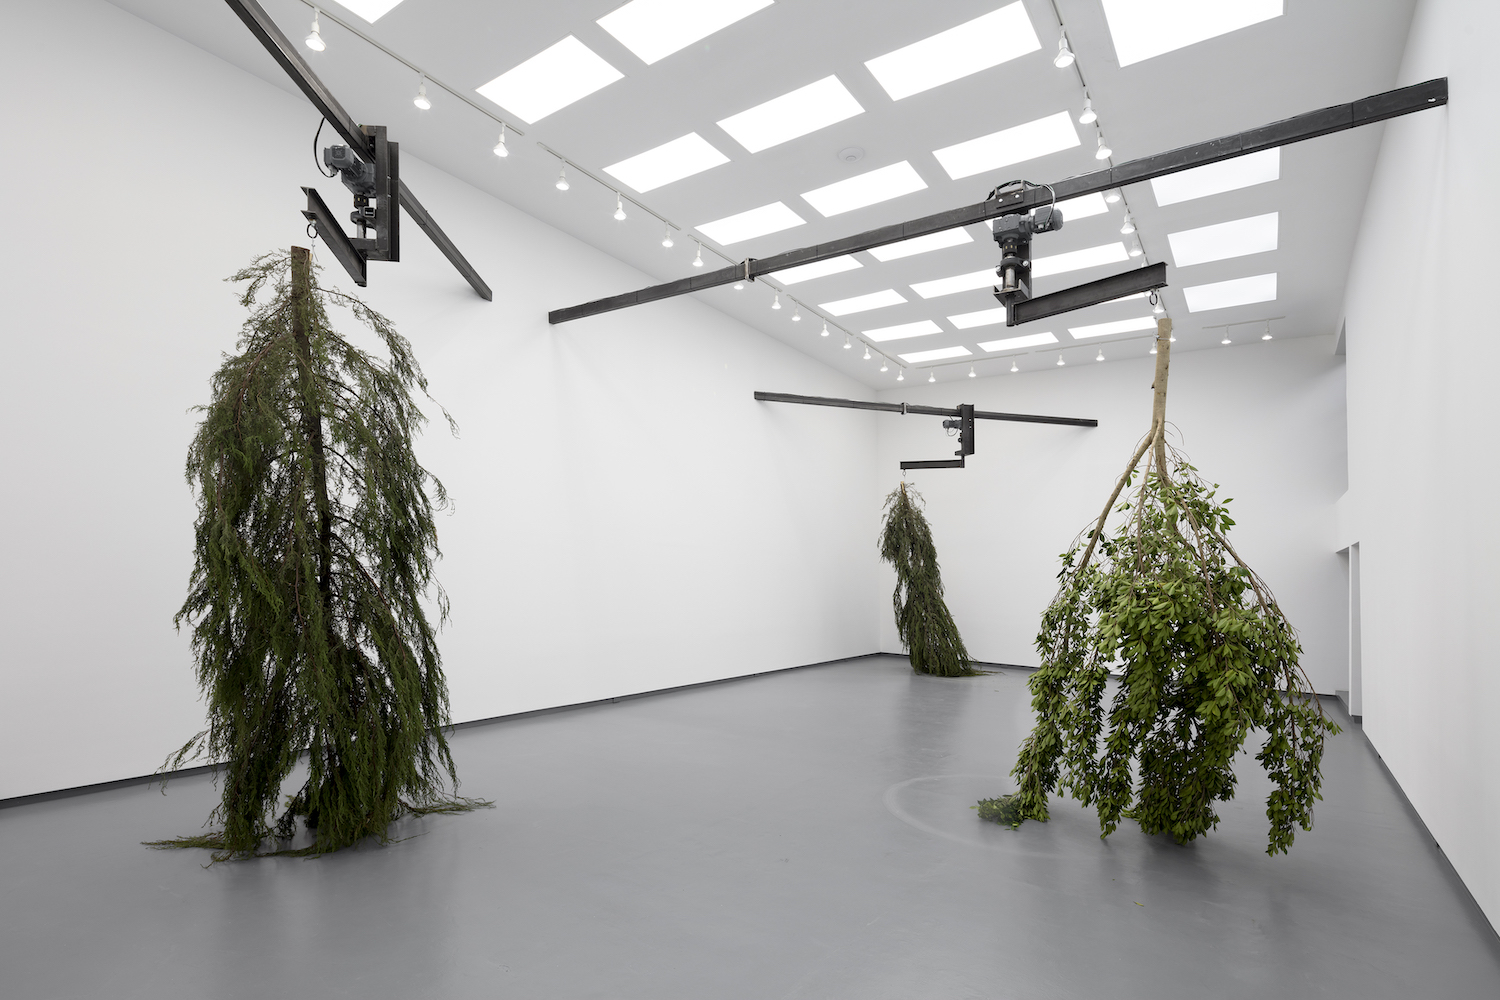 Installation view of Michael Sailstorfer's "Clearing"